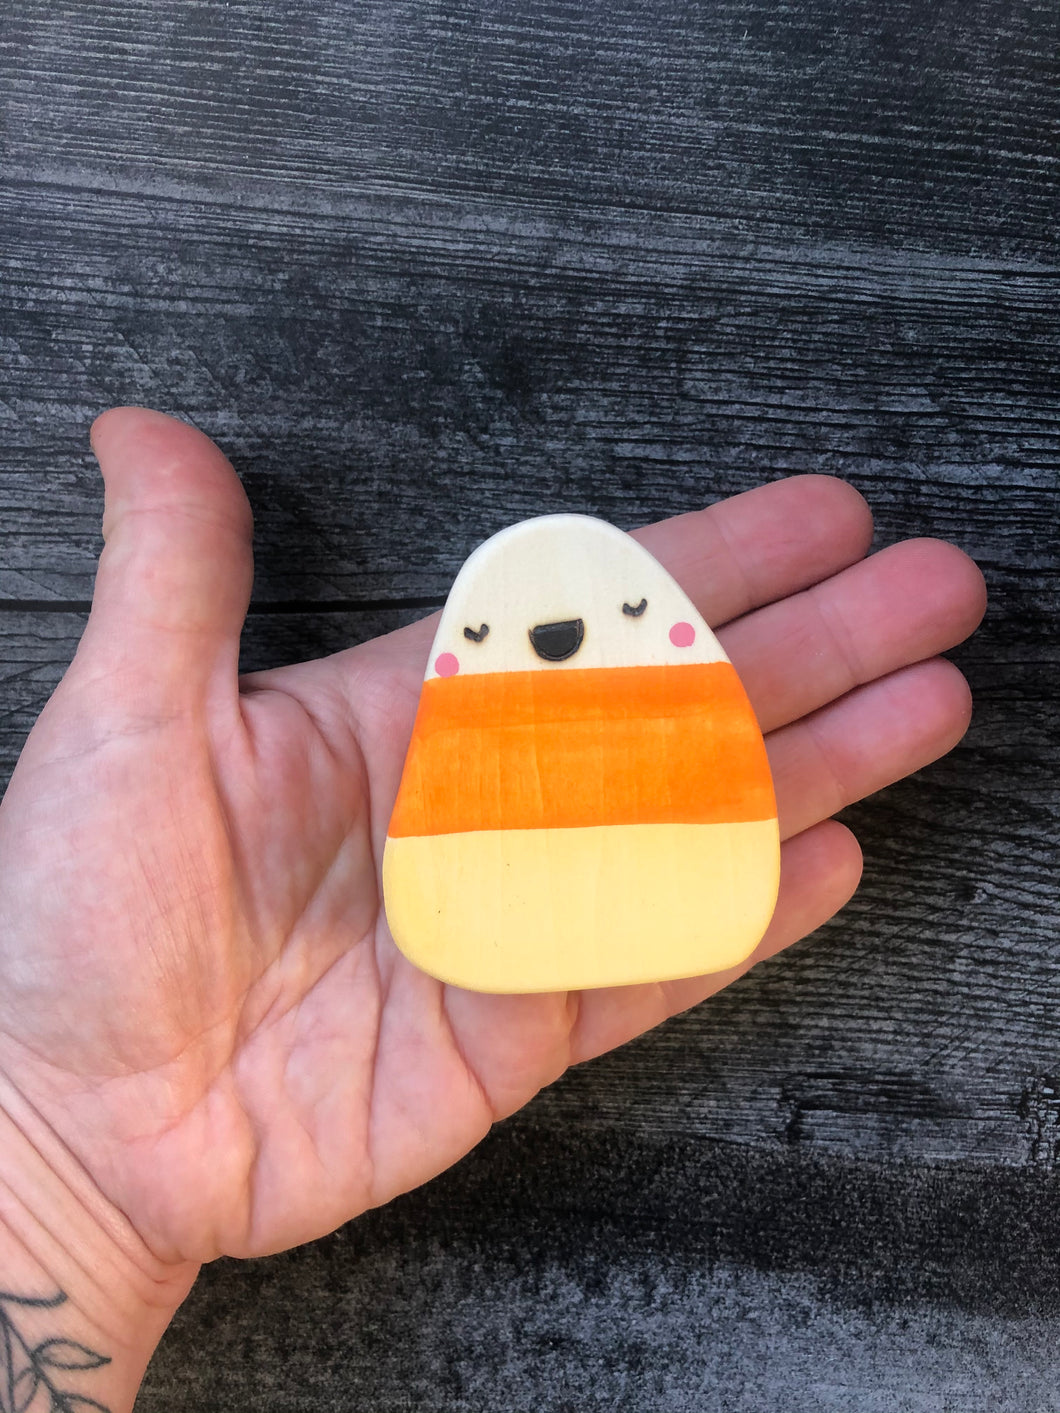 Nugget the Candycorn